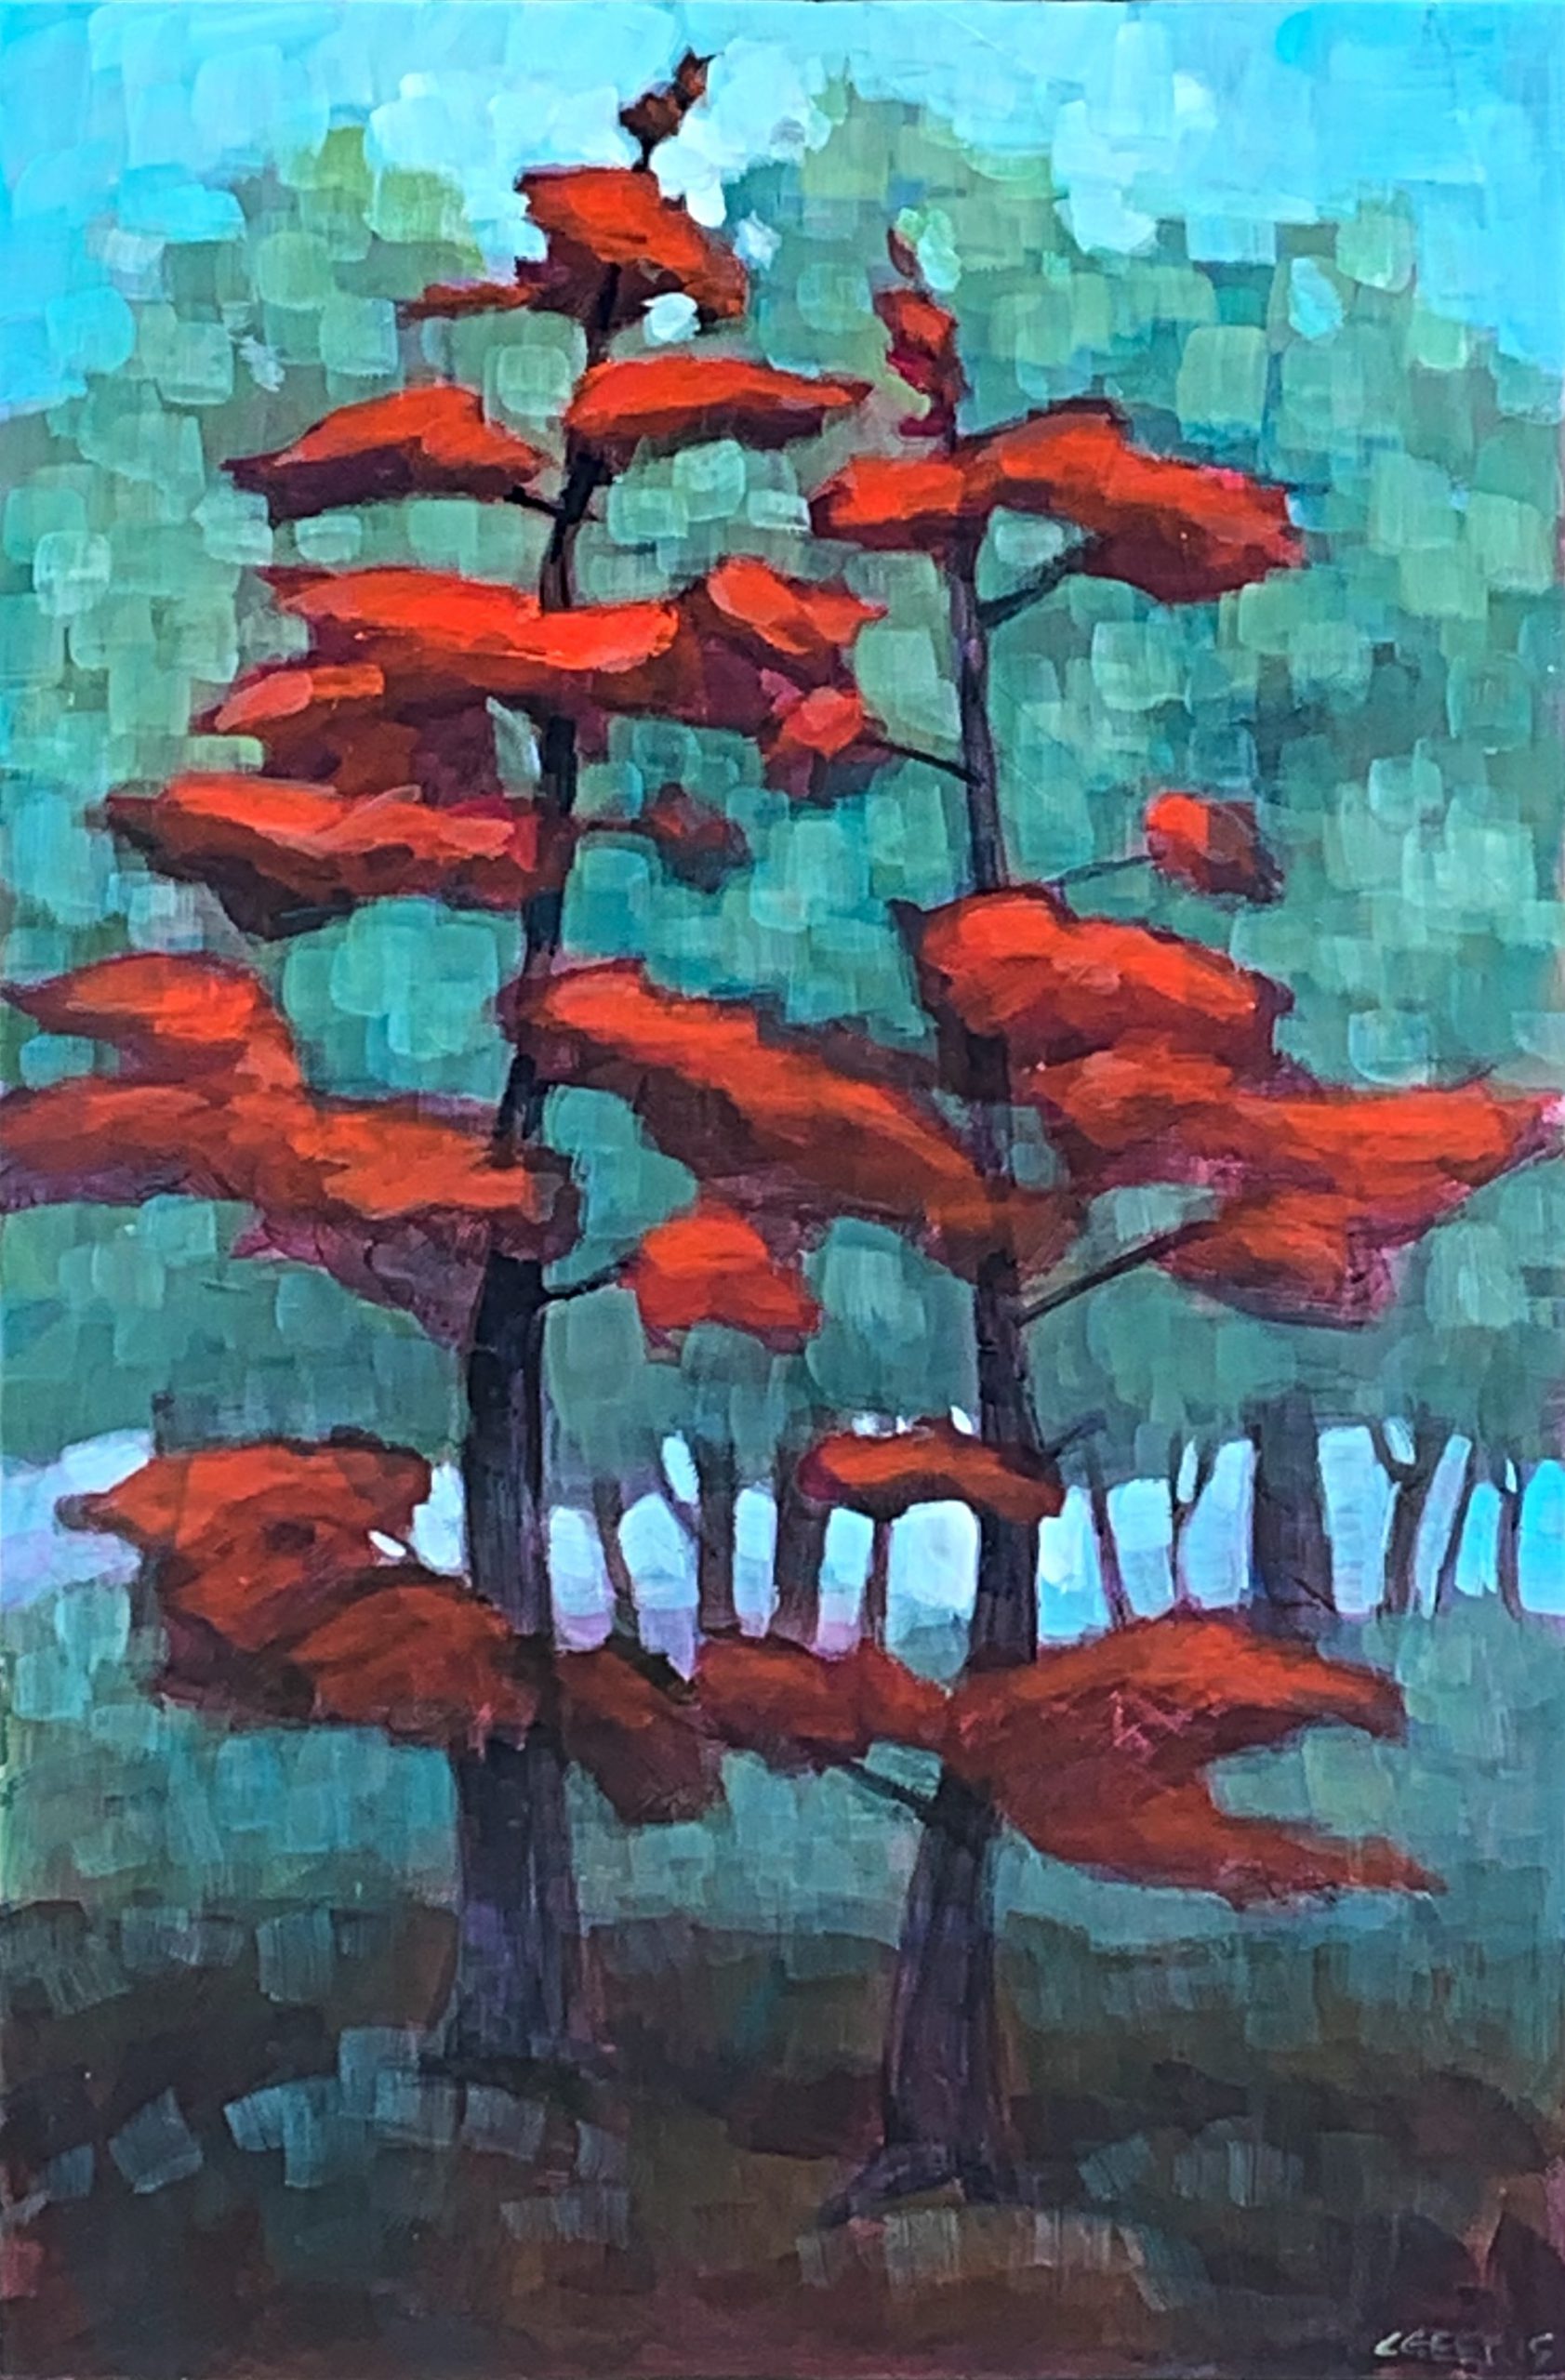 Cool Shade, mixed media tree painting by Connie Geerts | Effusion Art Gallery + Cast Glass Studio, Invermere BC